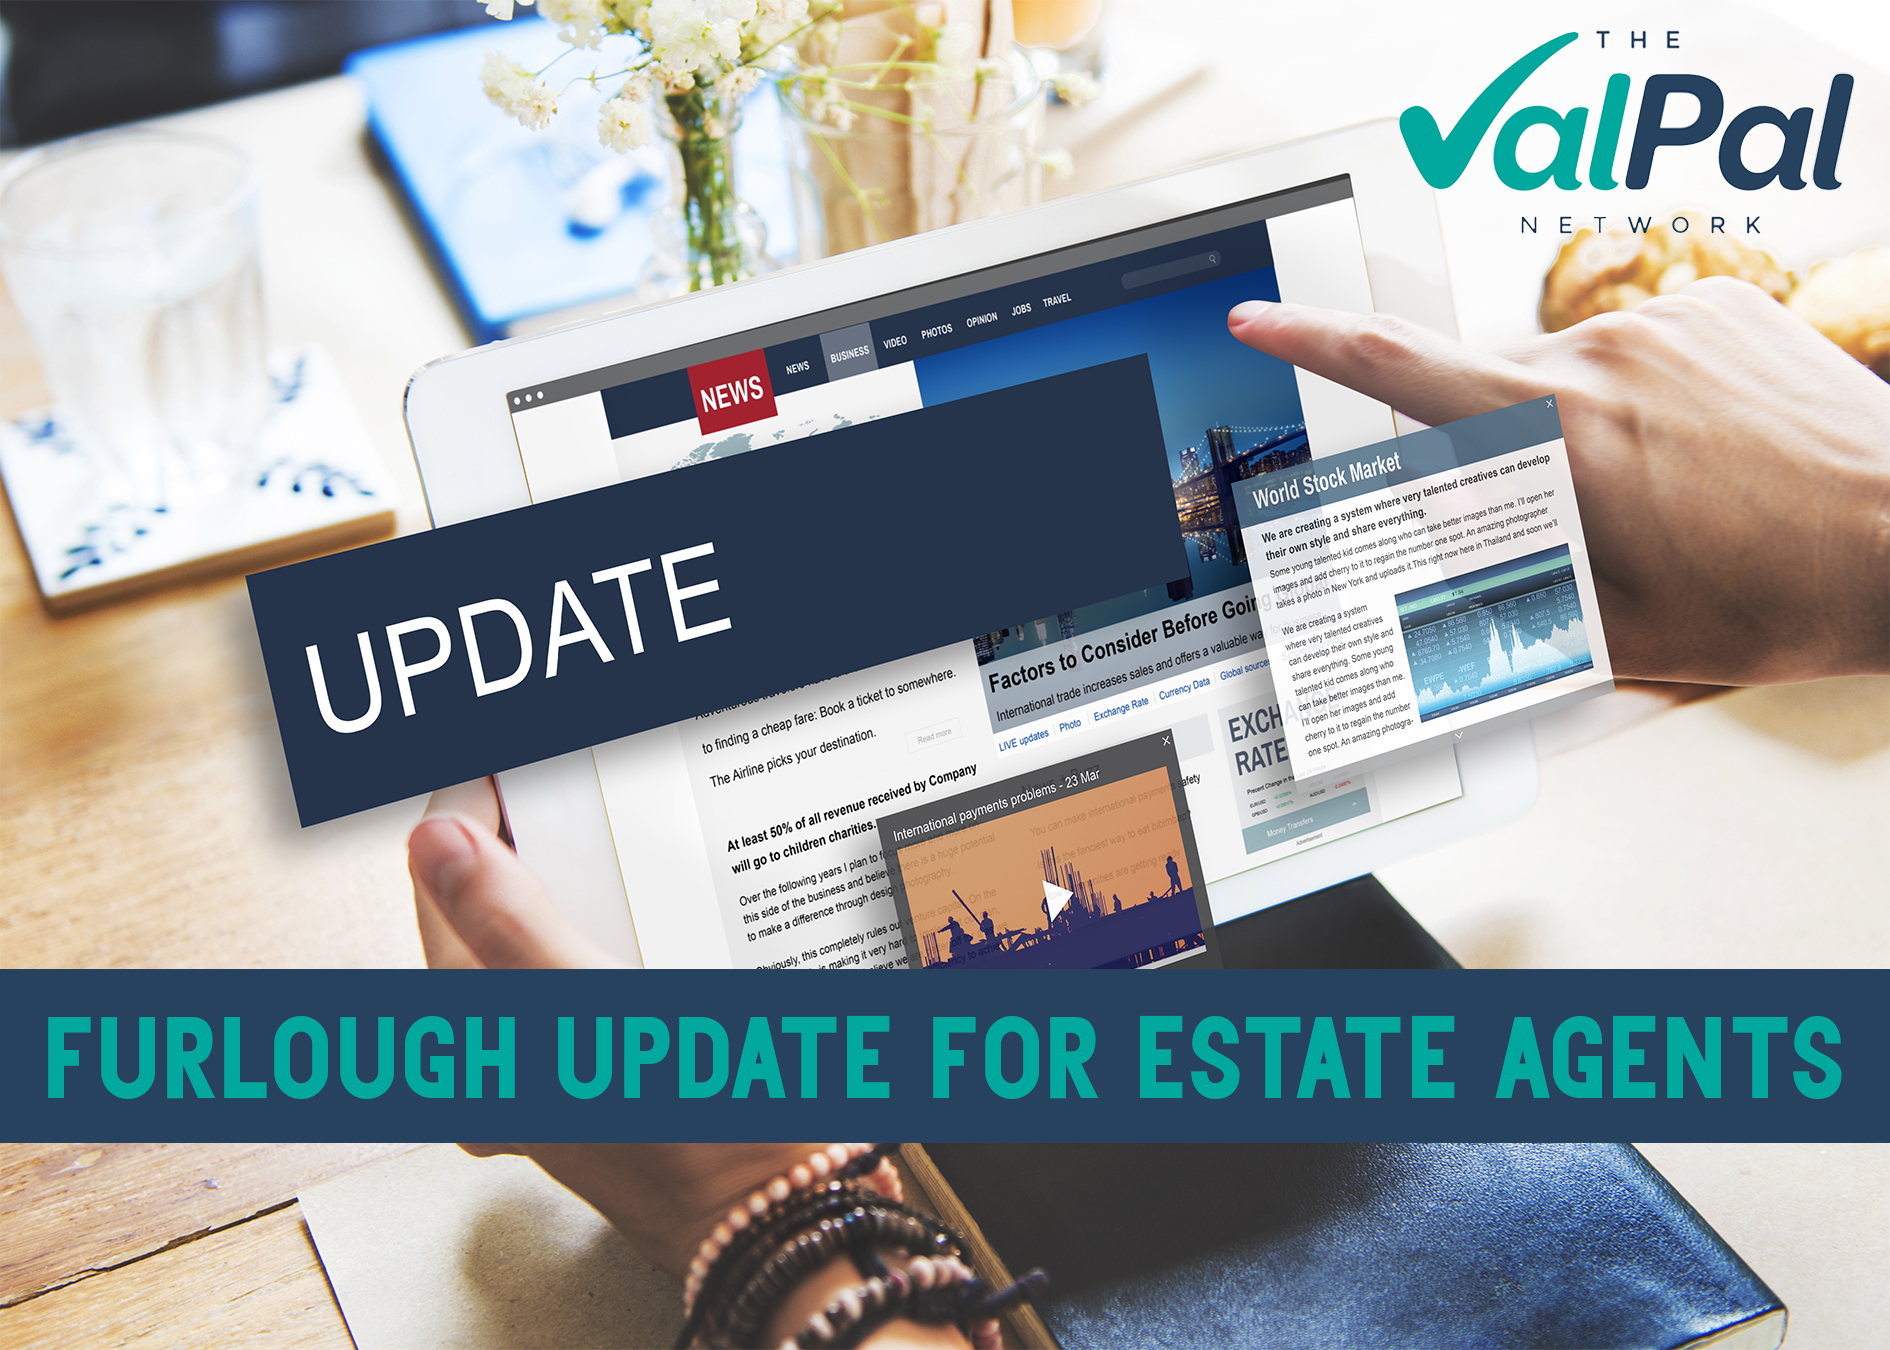 The ValPal Network's furloughing update for estate and letting agents